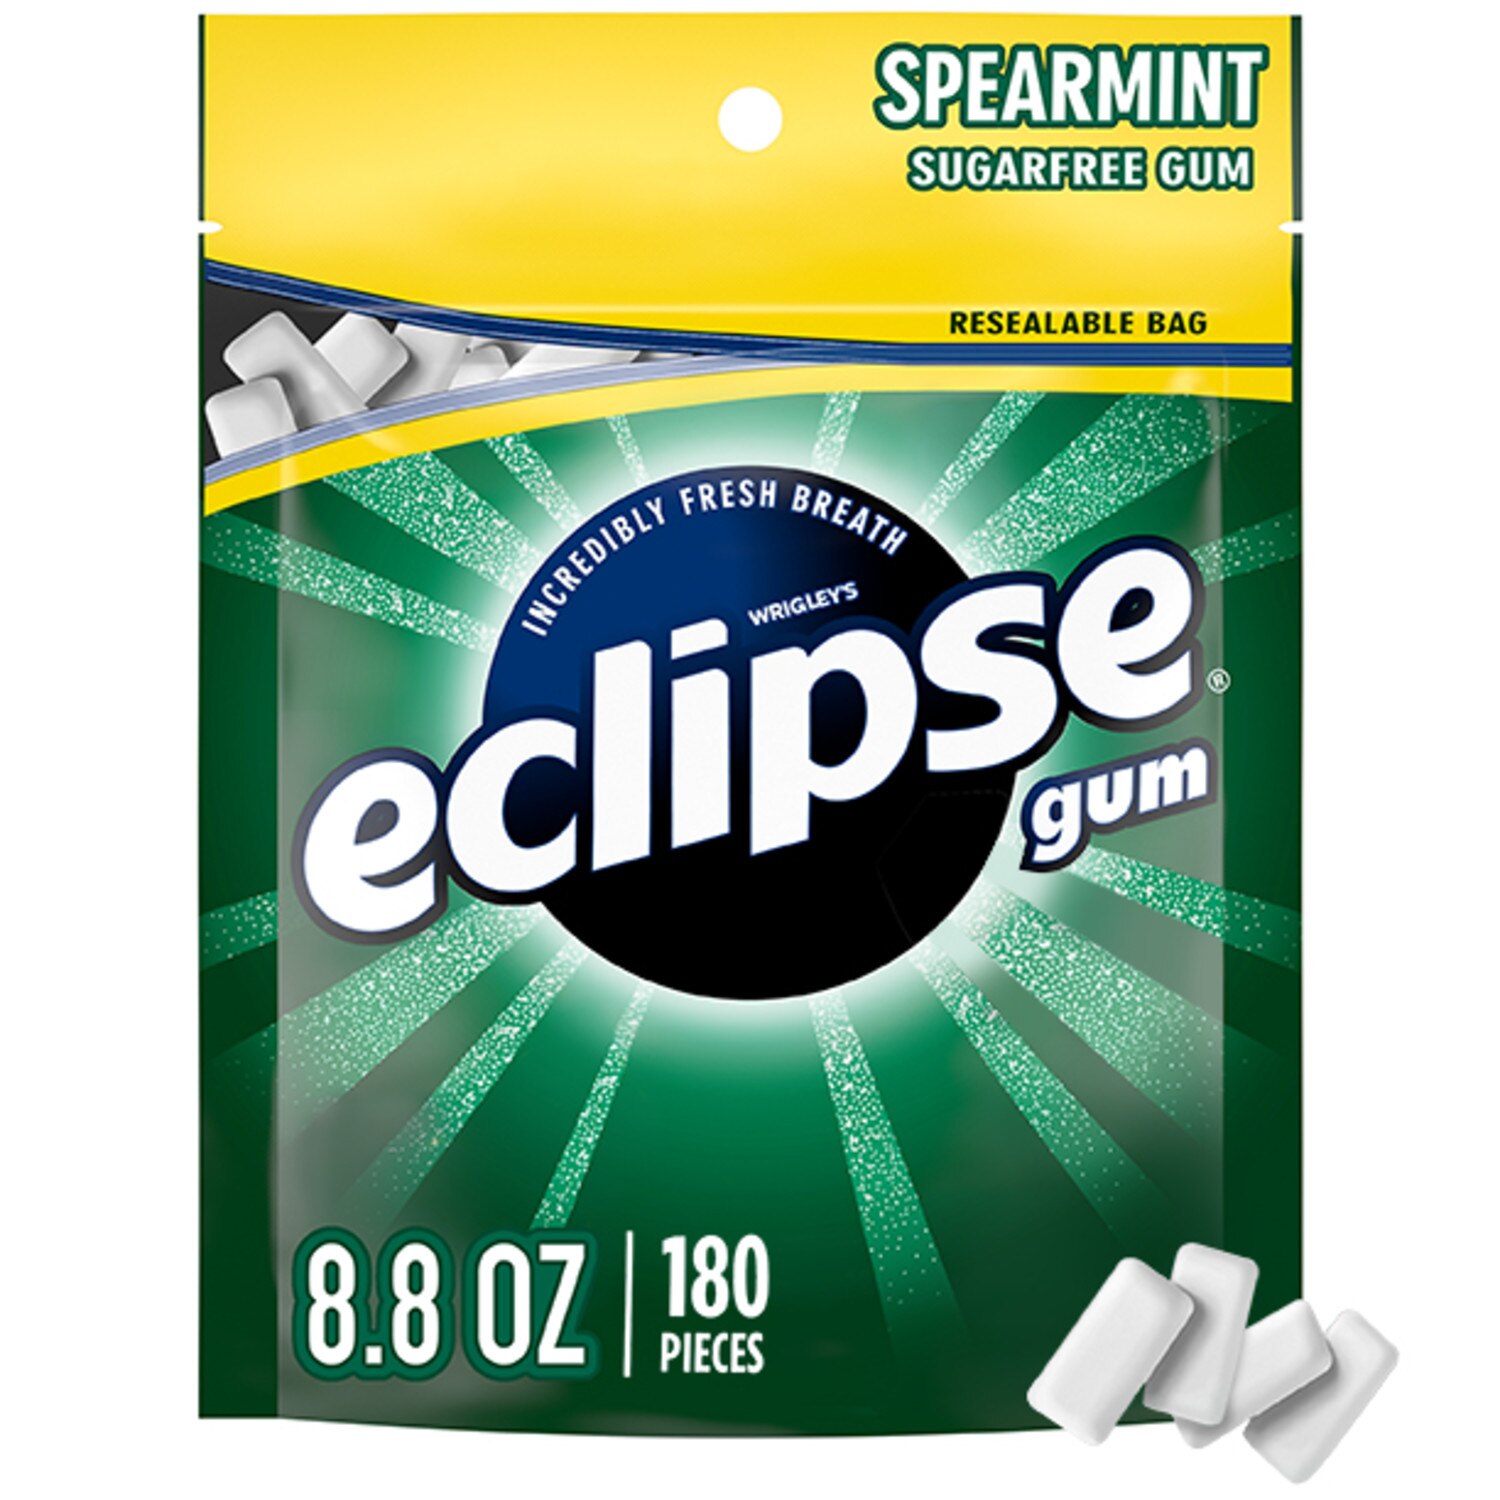 Eclipse Spearmint Sugar Free Chewing Gum Value Pack, 180 ct